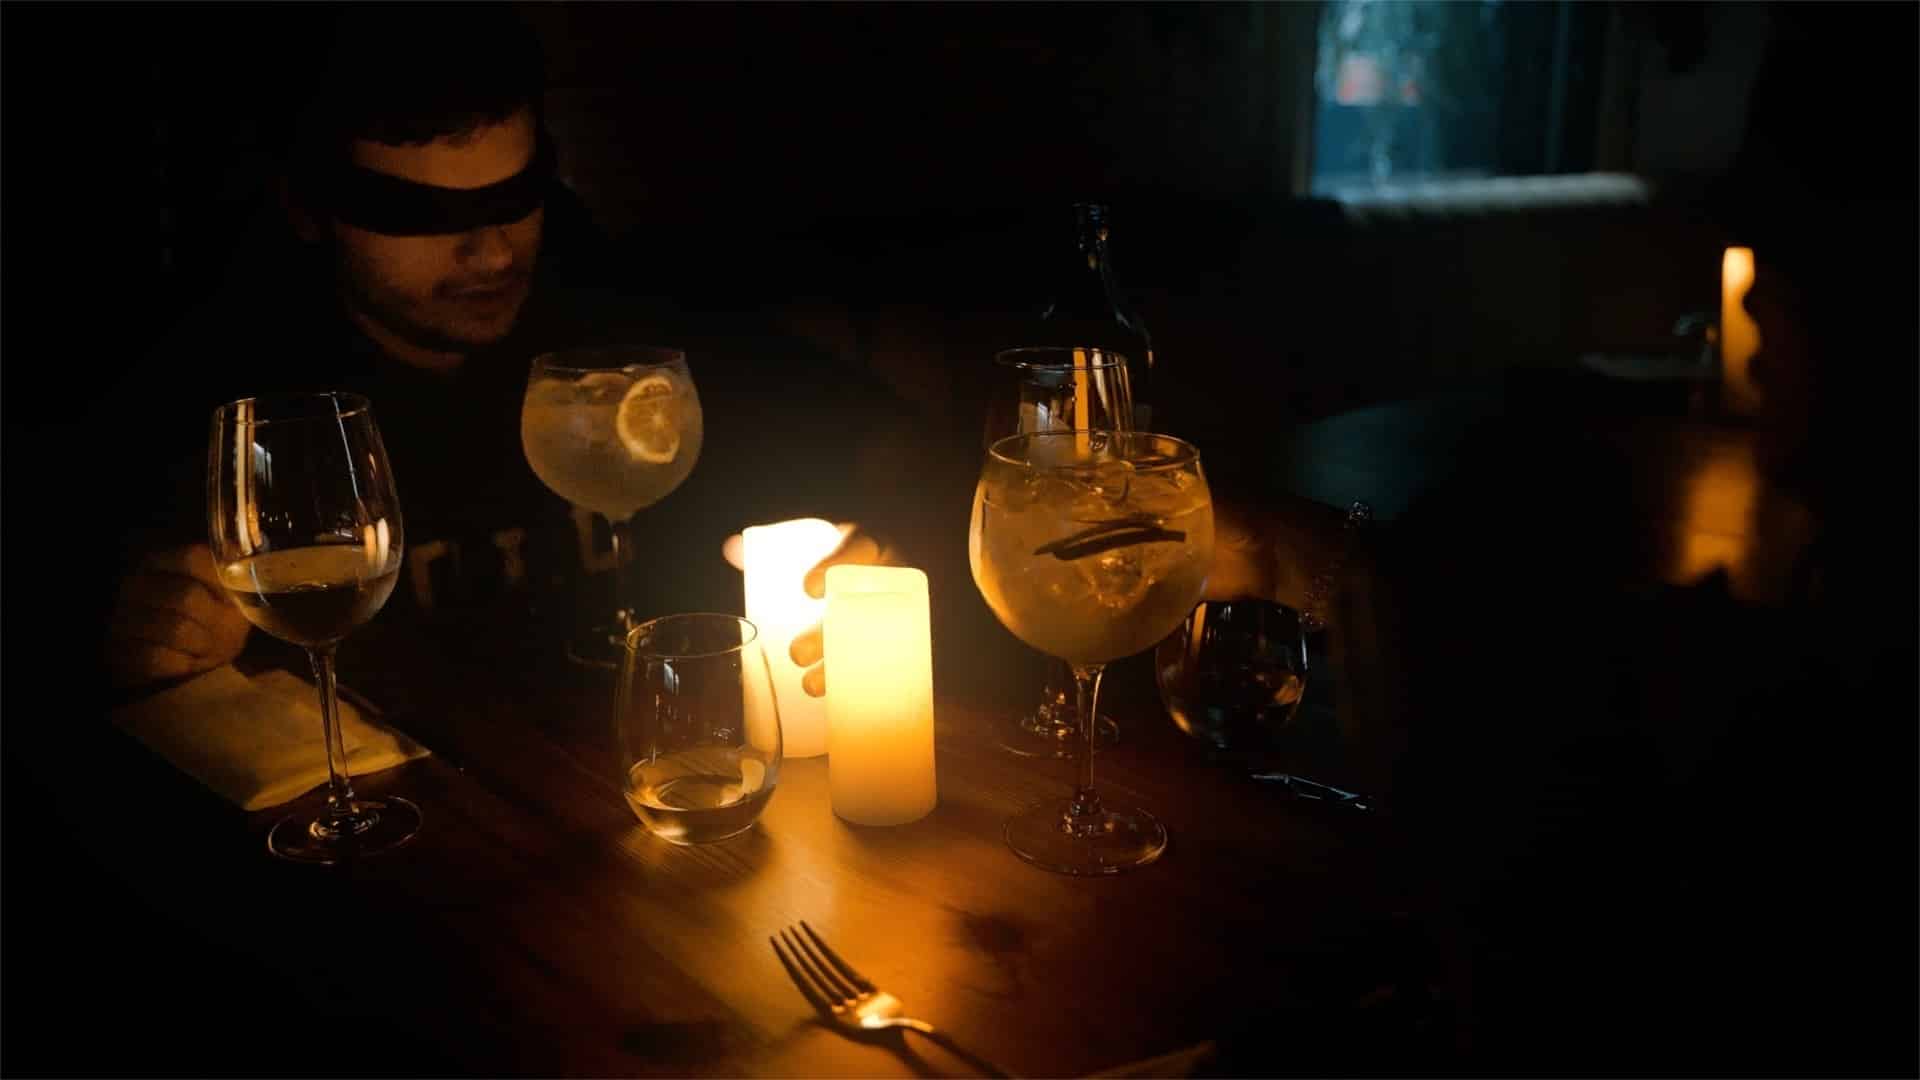 Dining in the Dark: A Unique Blindfolded Dining Experience (Ambar Clarendon)